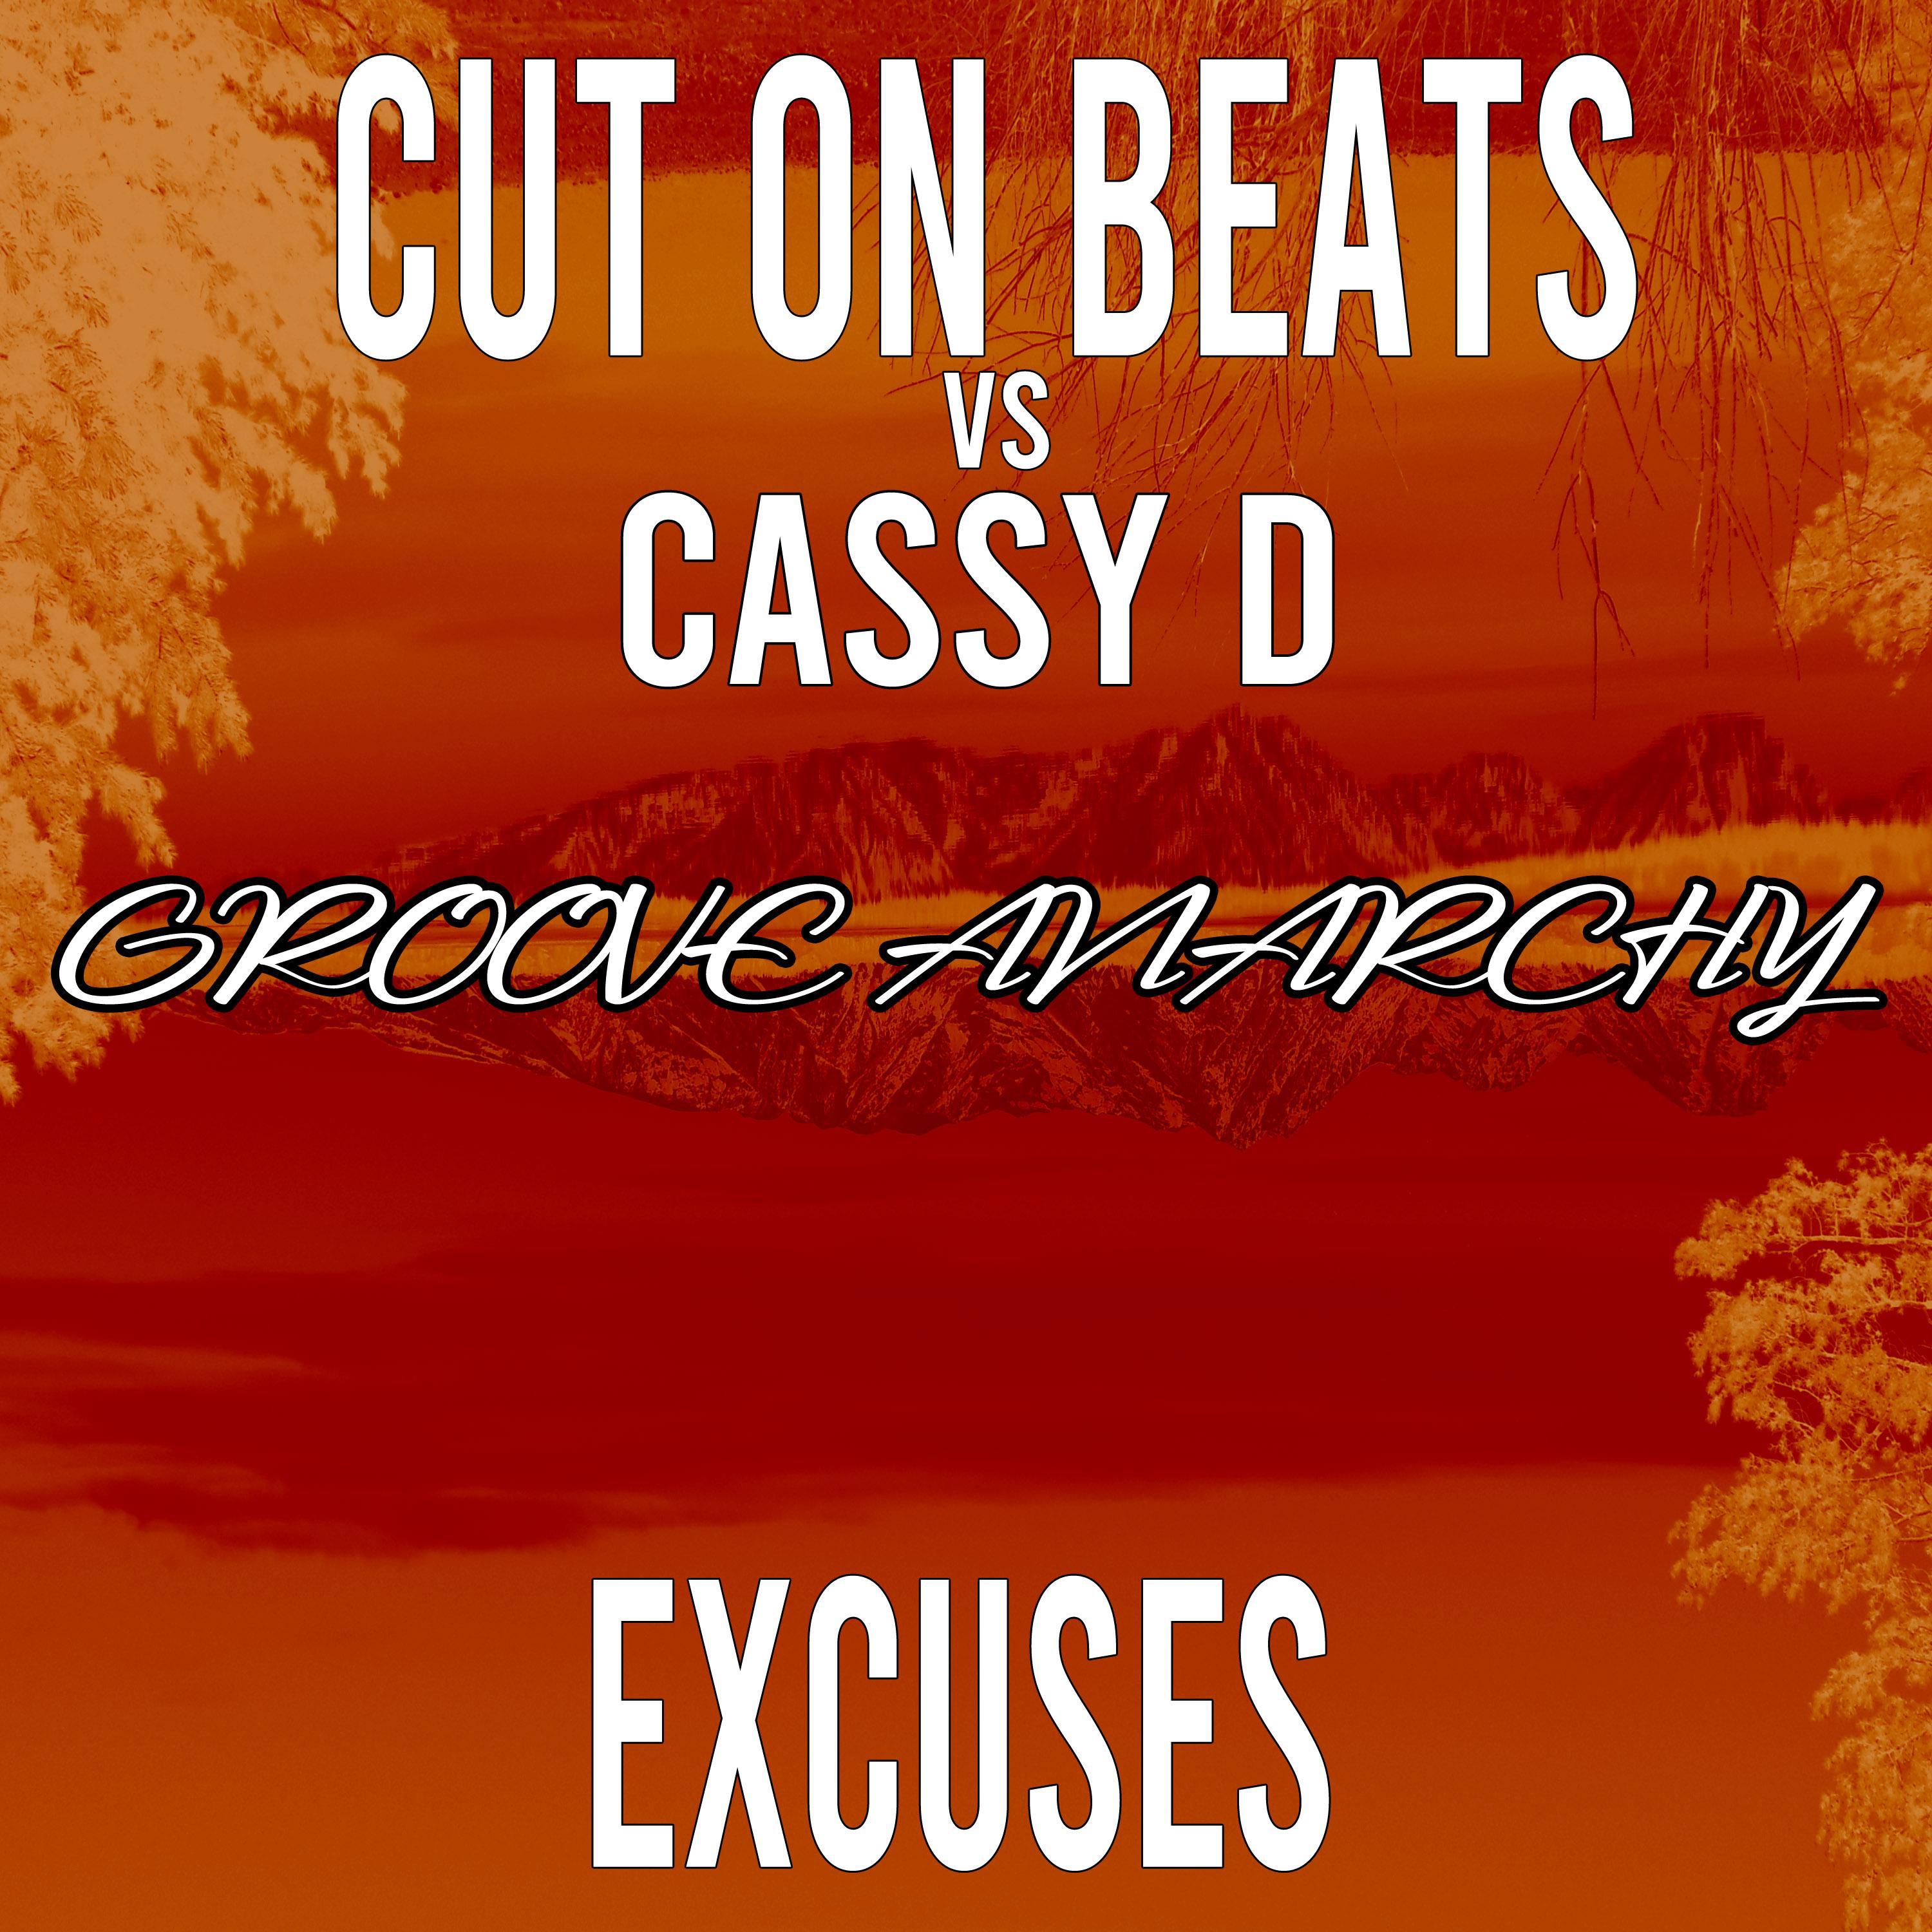 Cut On Beats - Excuses (feat. Cassy D) [Lorenzo Righini Remix] (Instrumental mix)